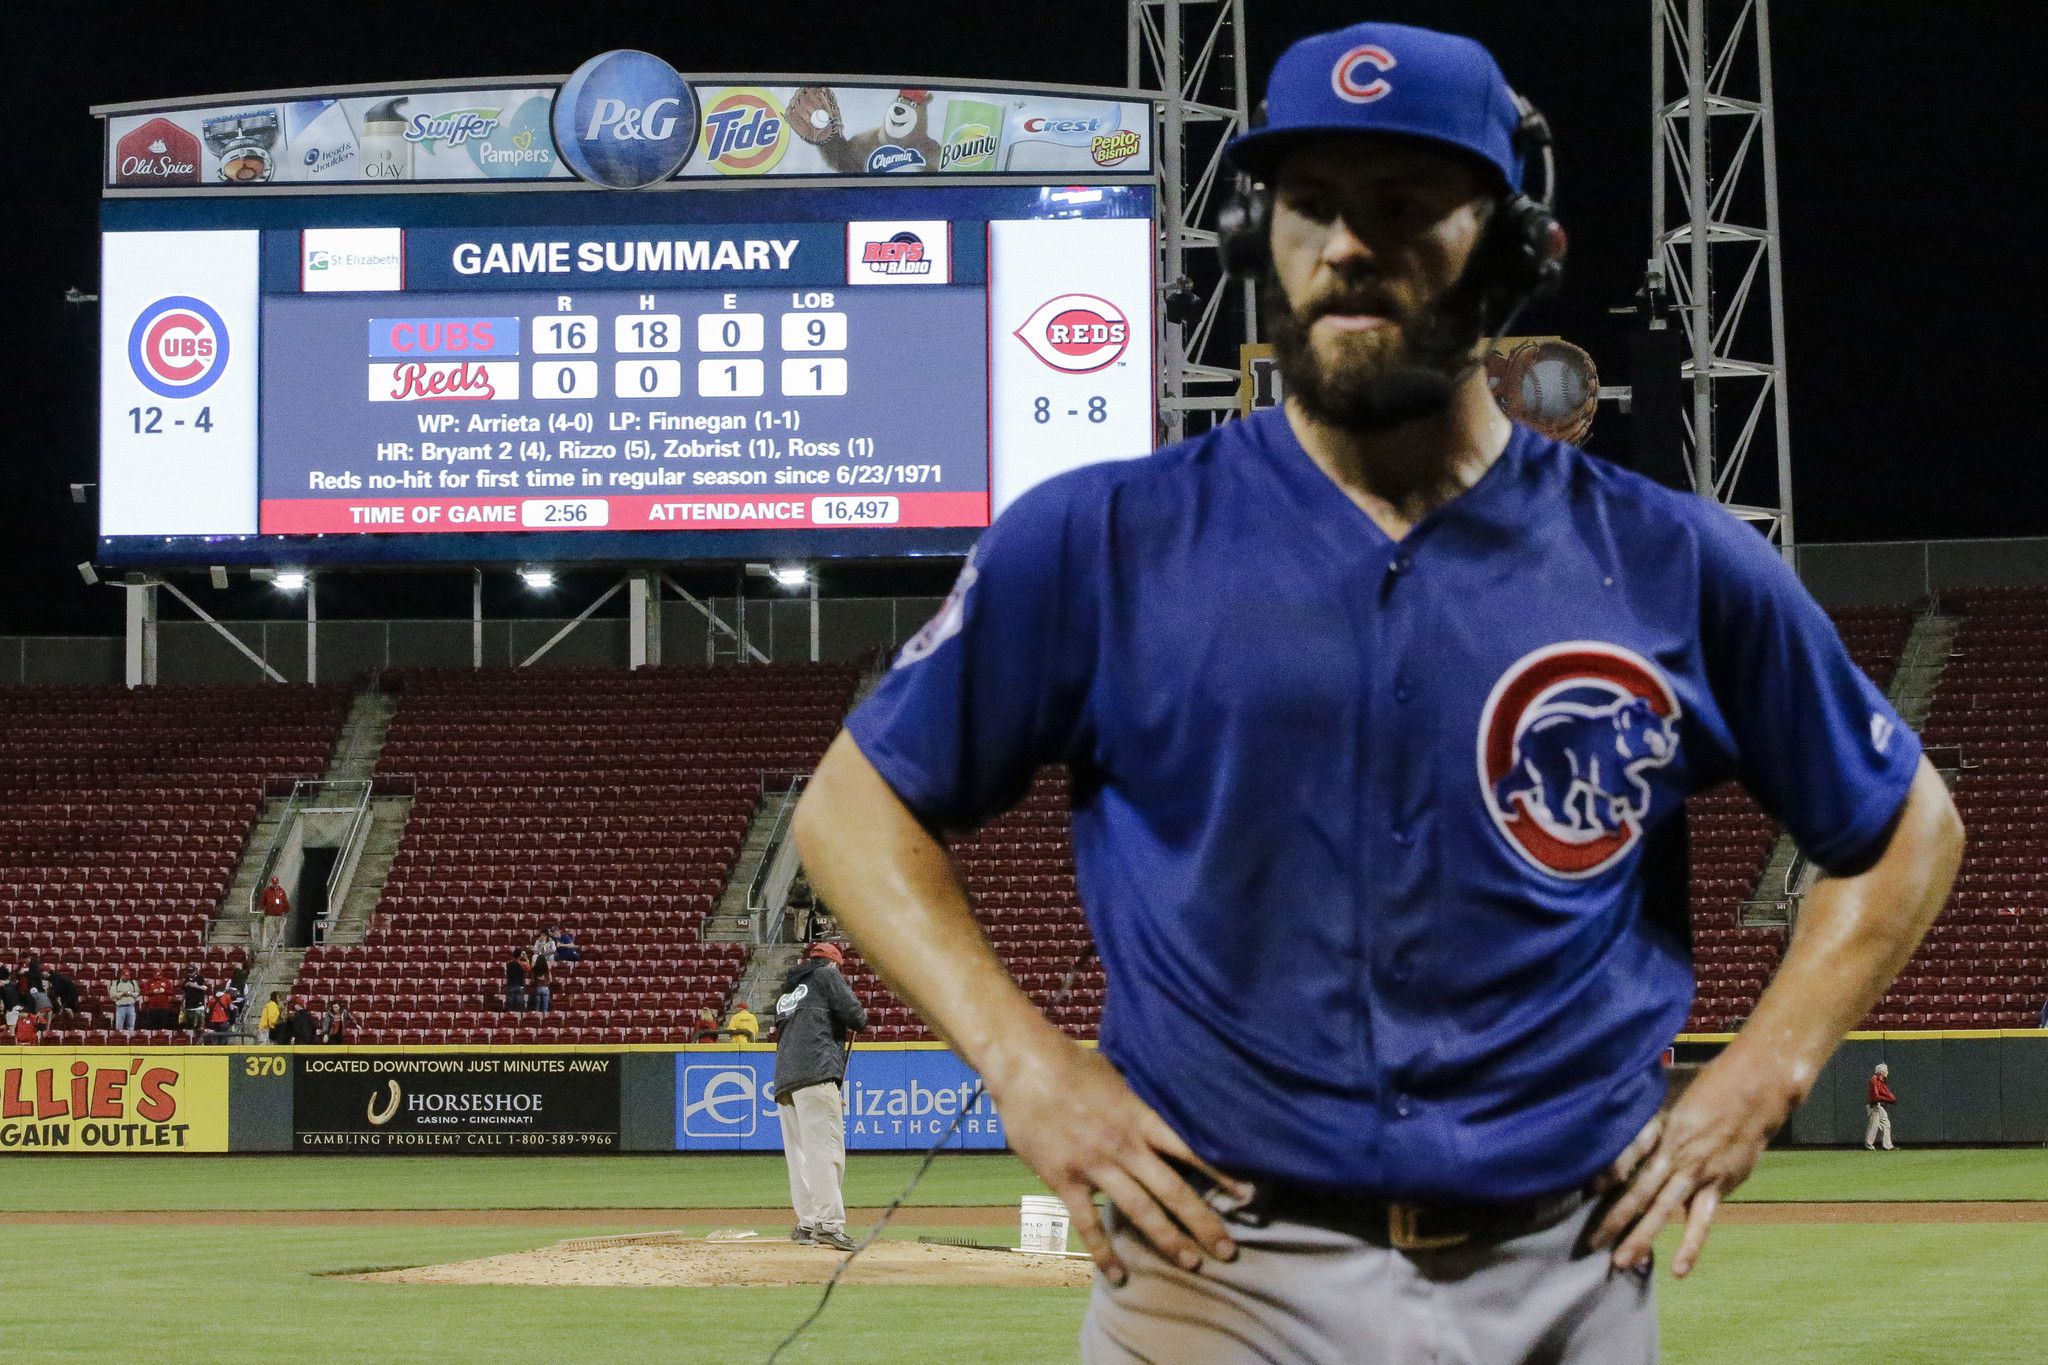 5 amazing things you didn't know about the Cubs World Series